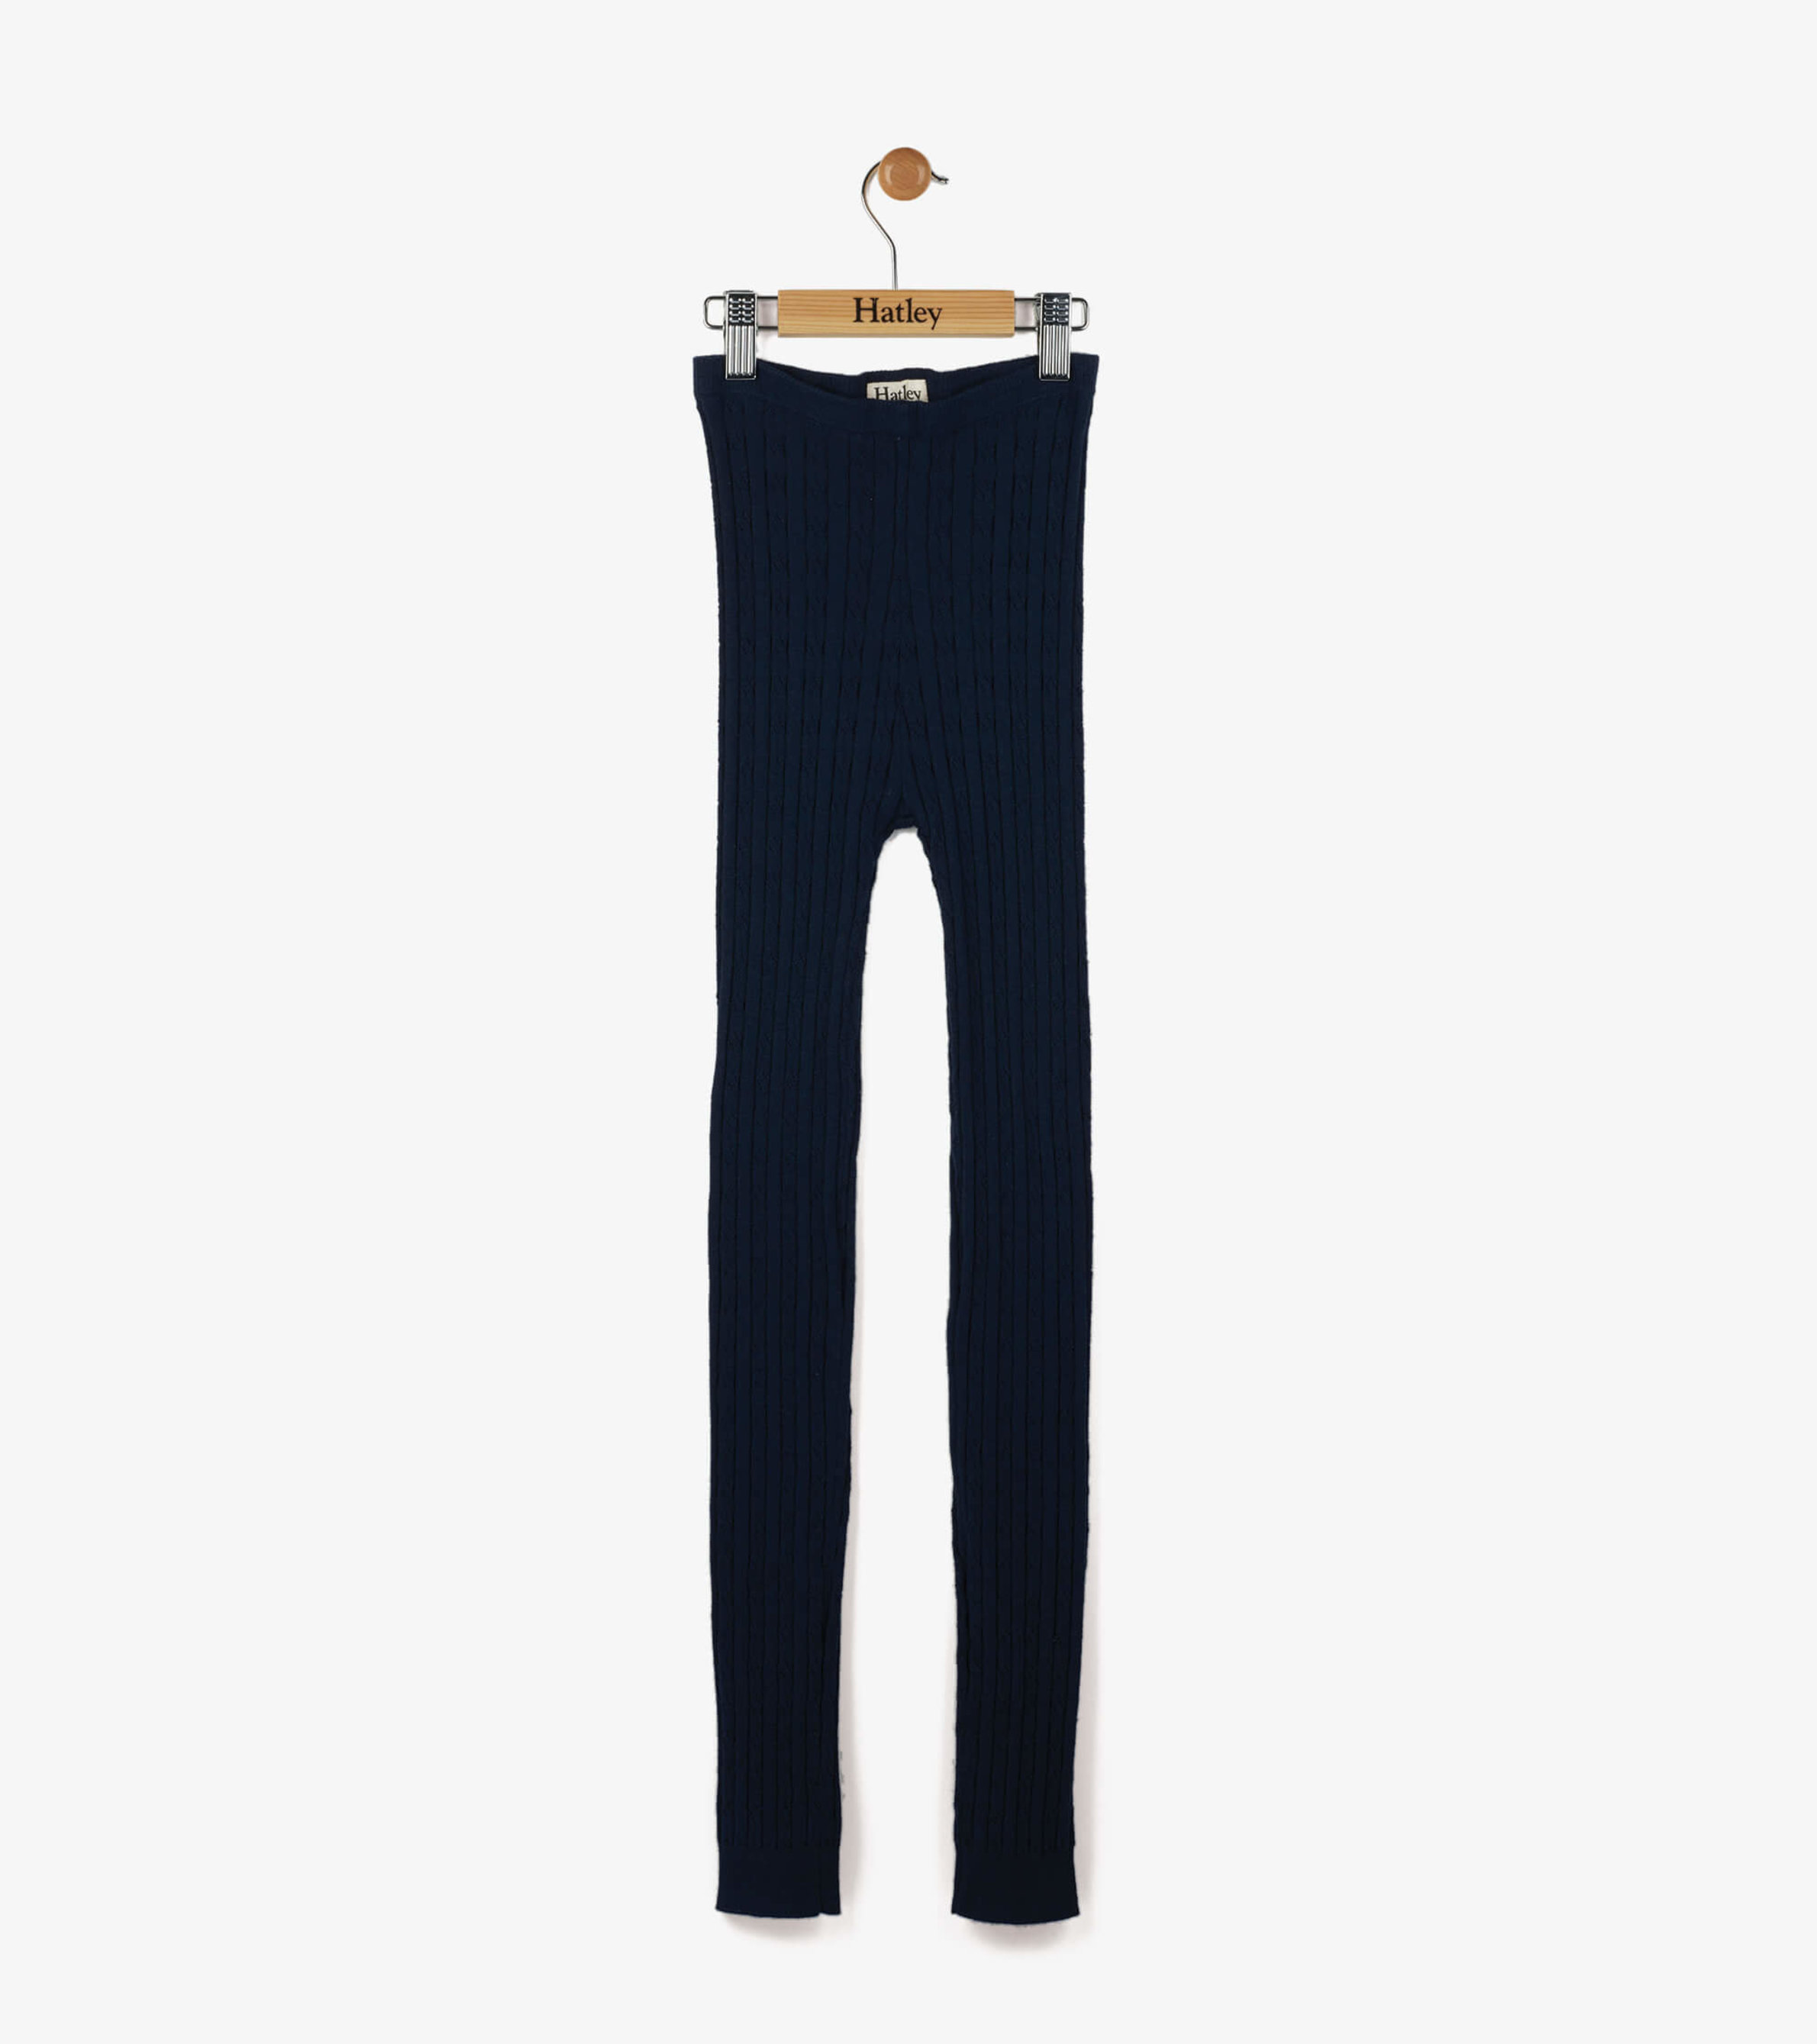 https://cdn.hatley.com/product_images/navy-cable-knit-tights/F00NBK744B_A_jpg/pdp_zoom.jpg?c=1695160363&locale=us_en